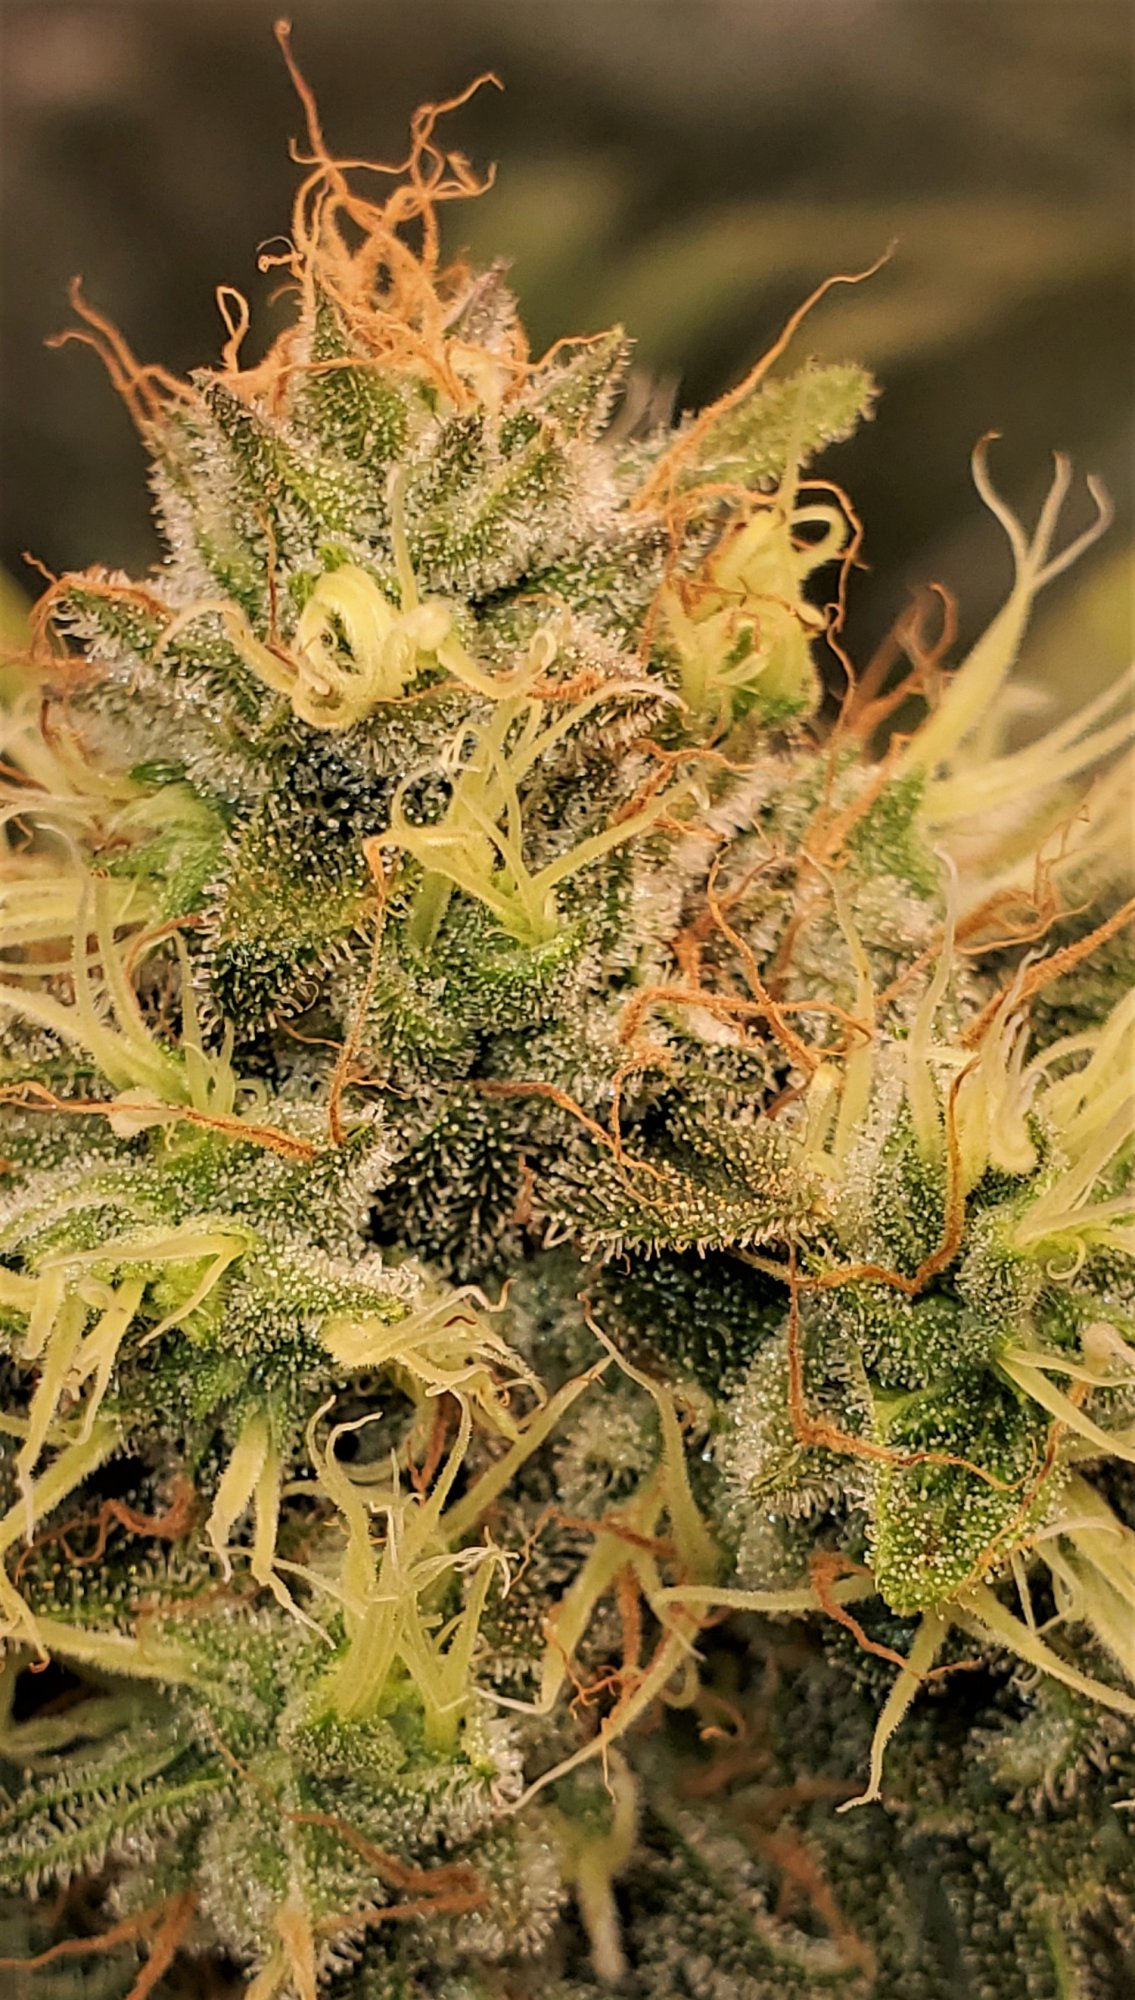 Amber trichomes over 50 at day 45 of flowering ready 10